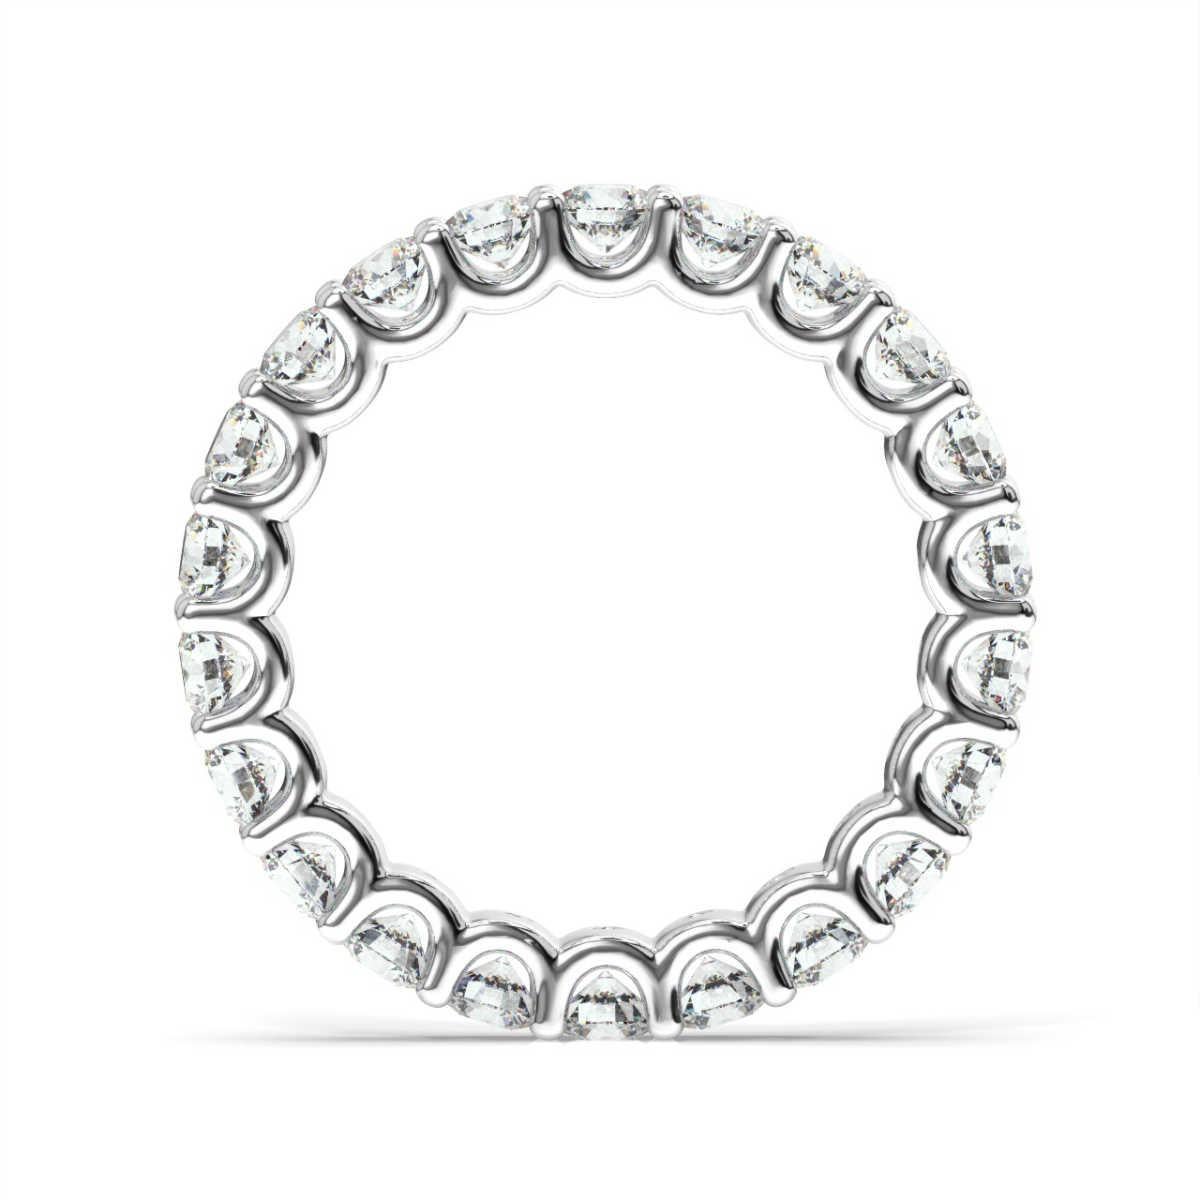 This eternity band features a perfectly matched round brilliant diamonds set in a 